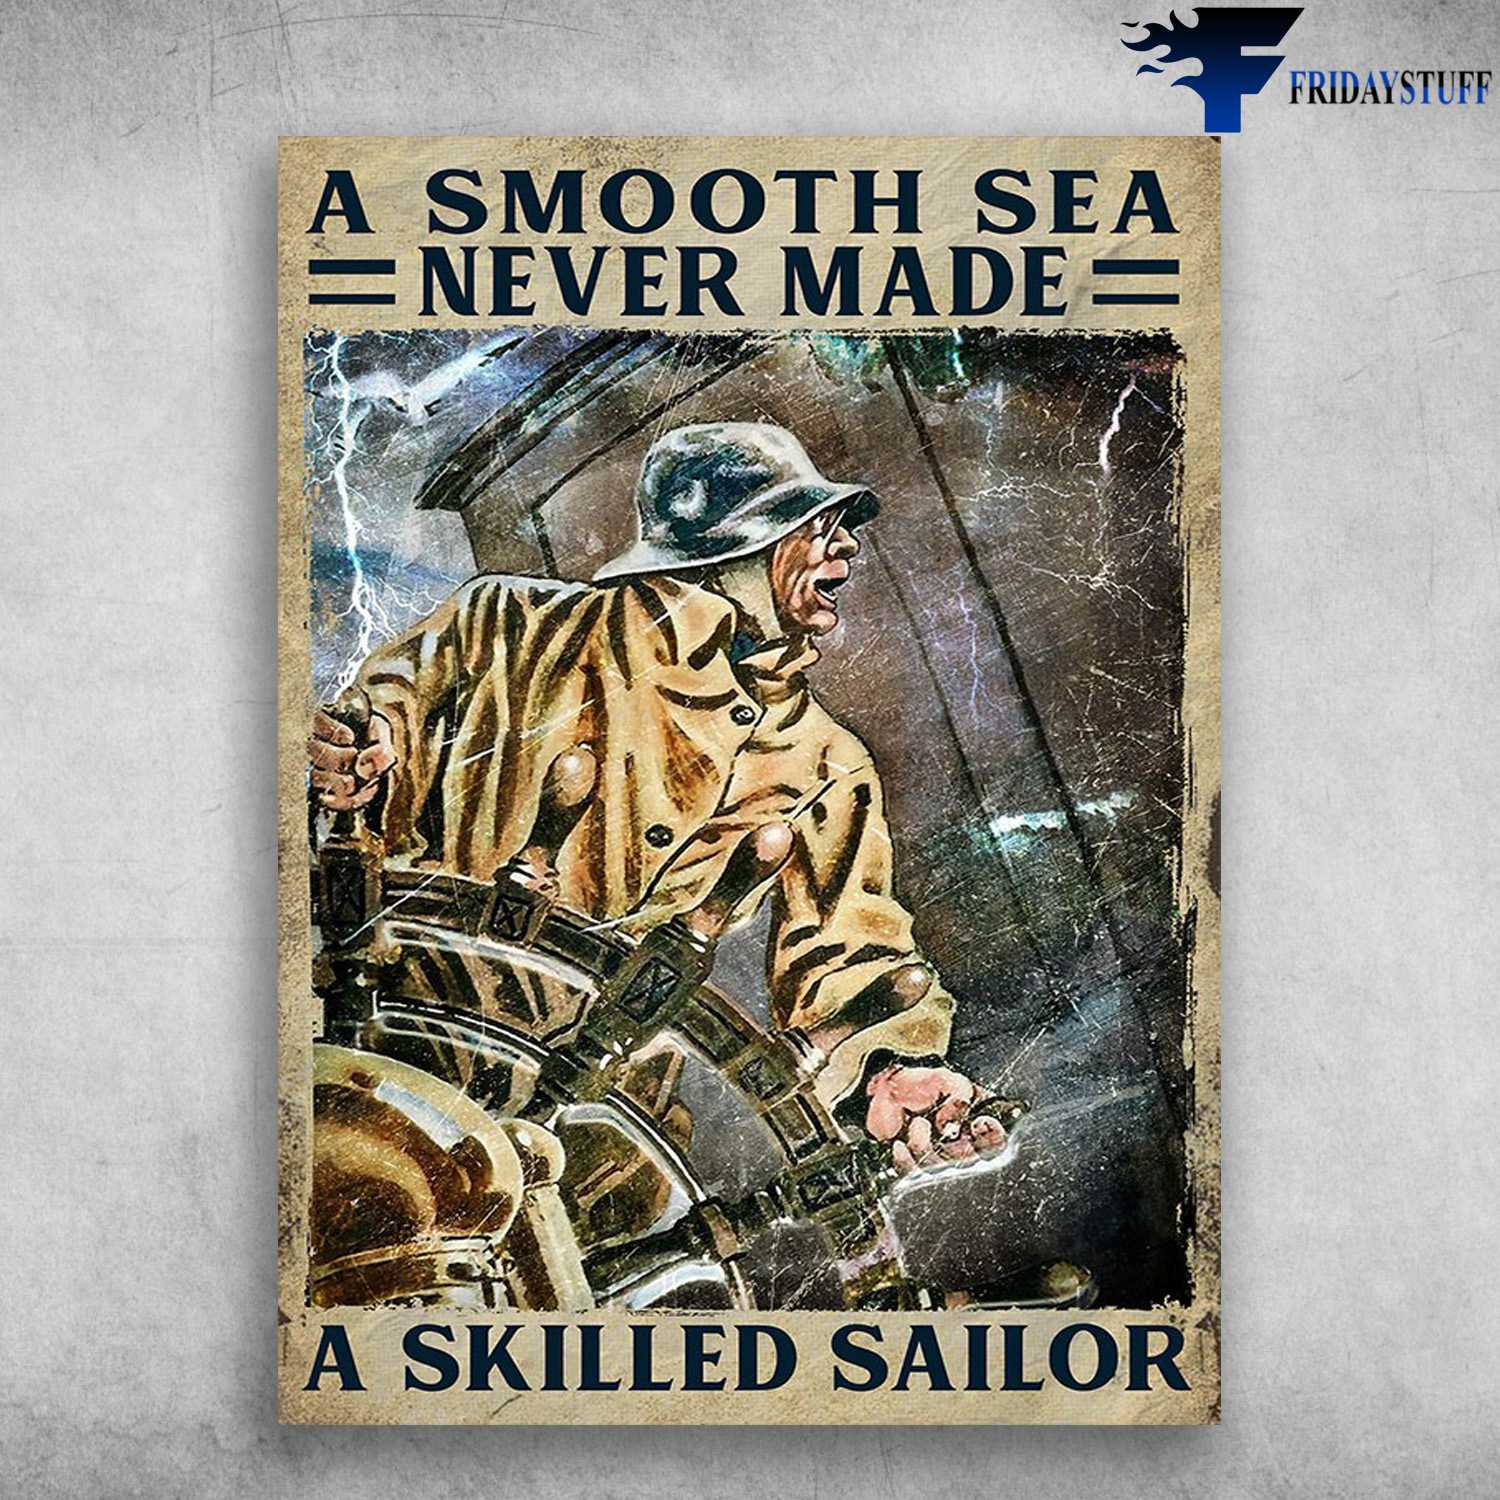 Old Sailor In Storm - A Smooth Sea, Never Made, A Skilled Sailor